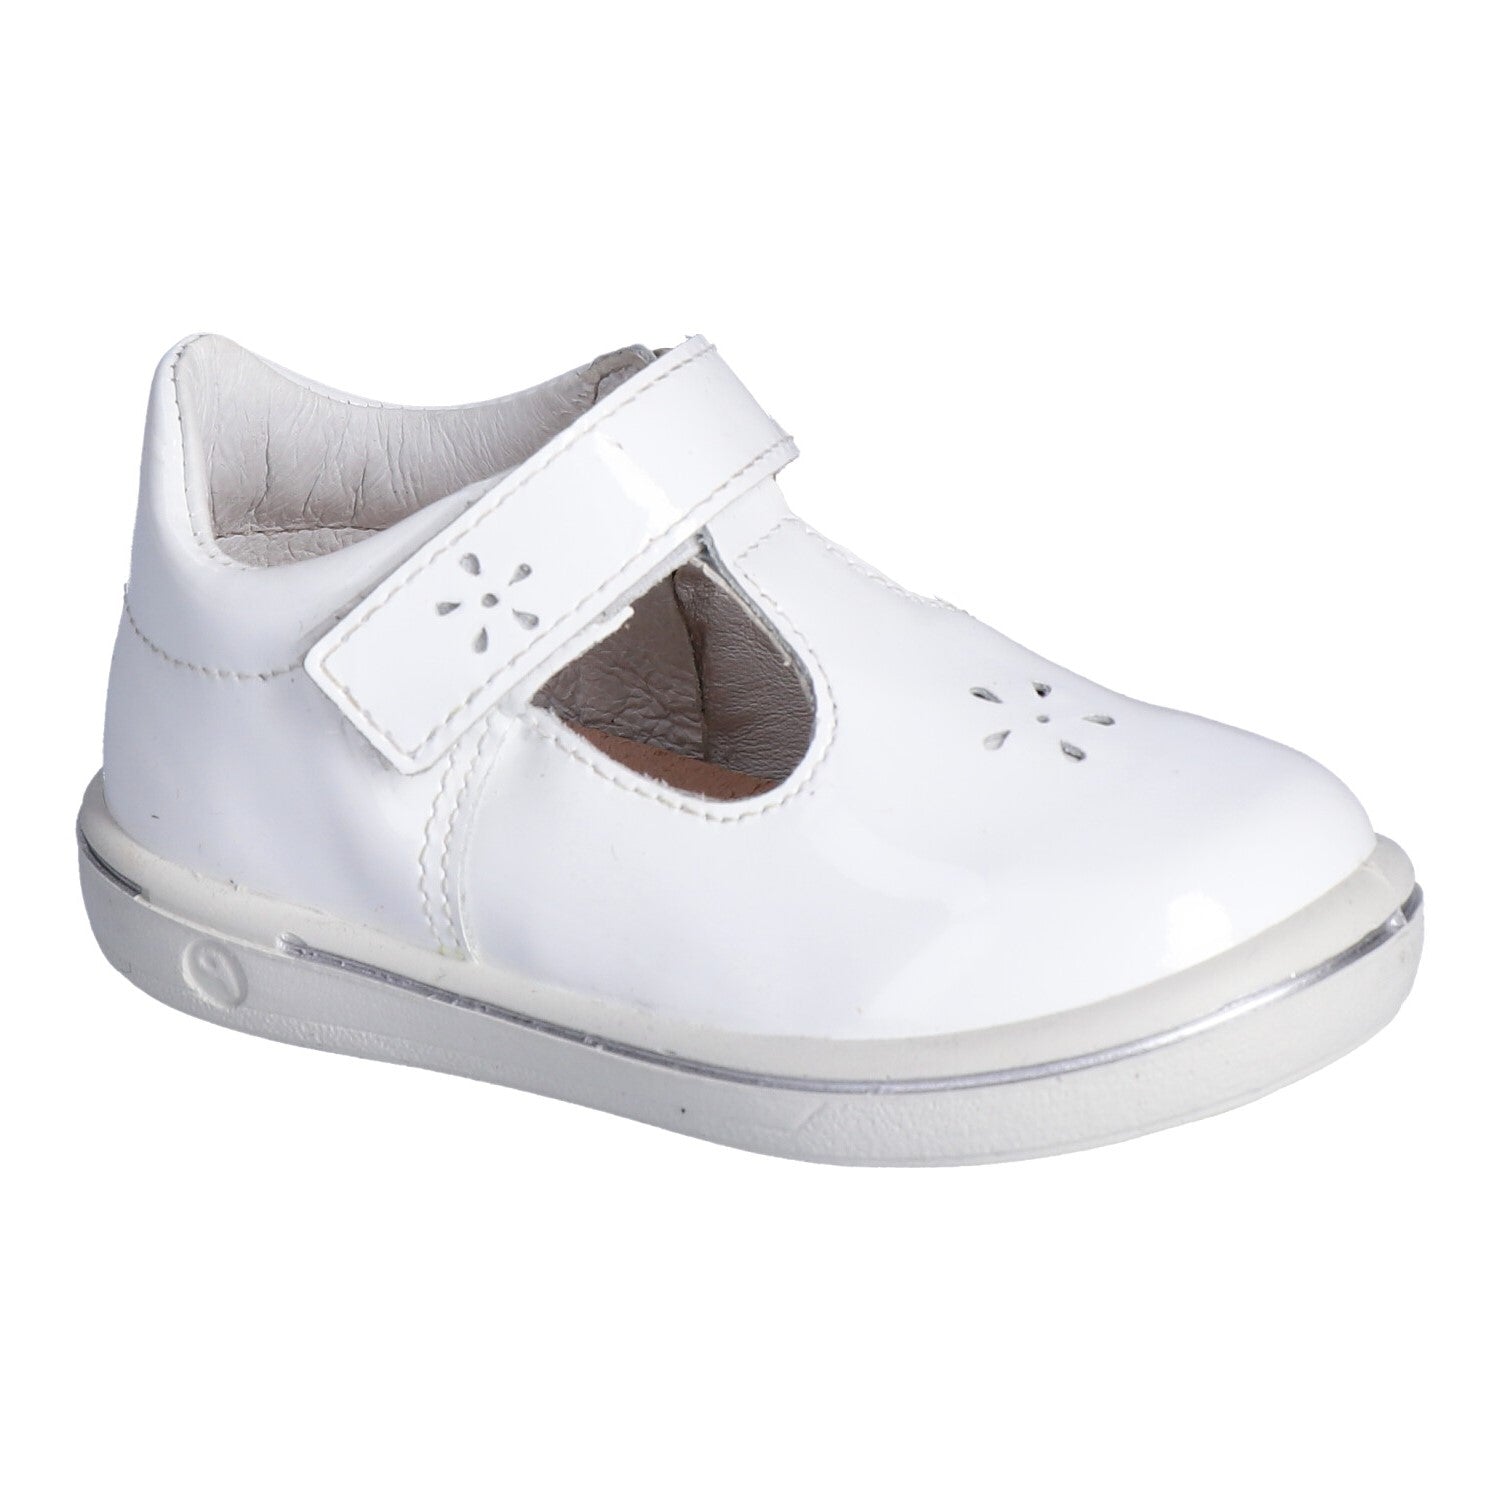 A girls T bar shoe by Ricosta, style Winona, in white patent leather with velcro fastening. Right side view.